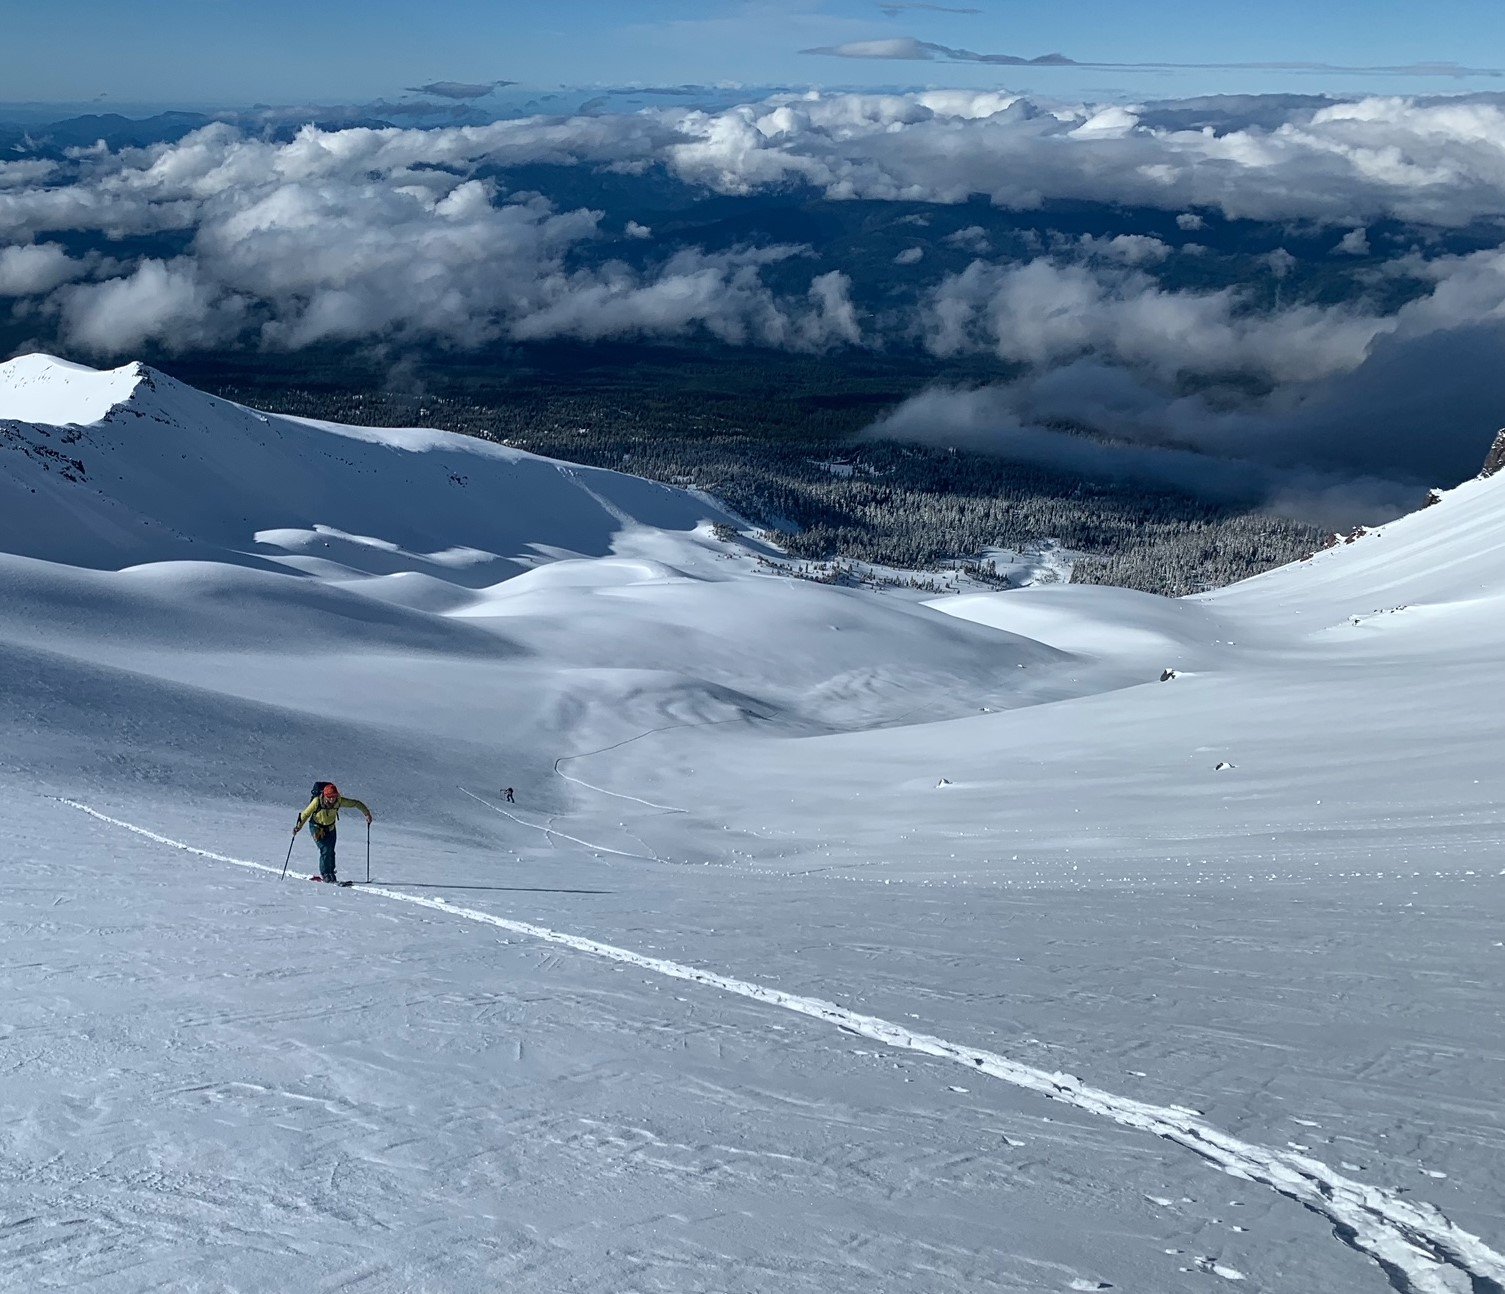 Mt shasta backcountry skier uses the skin track of their guide